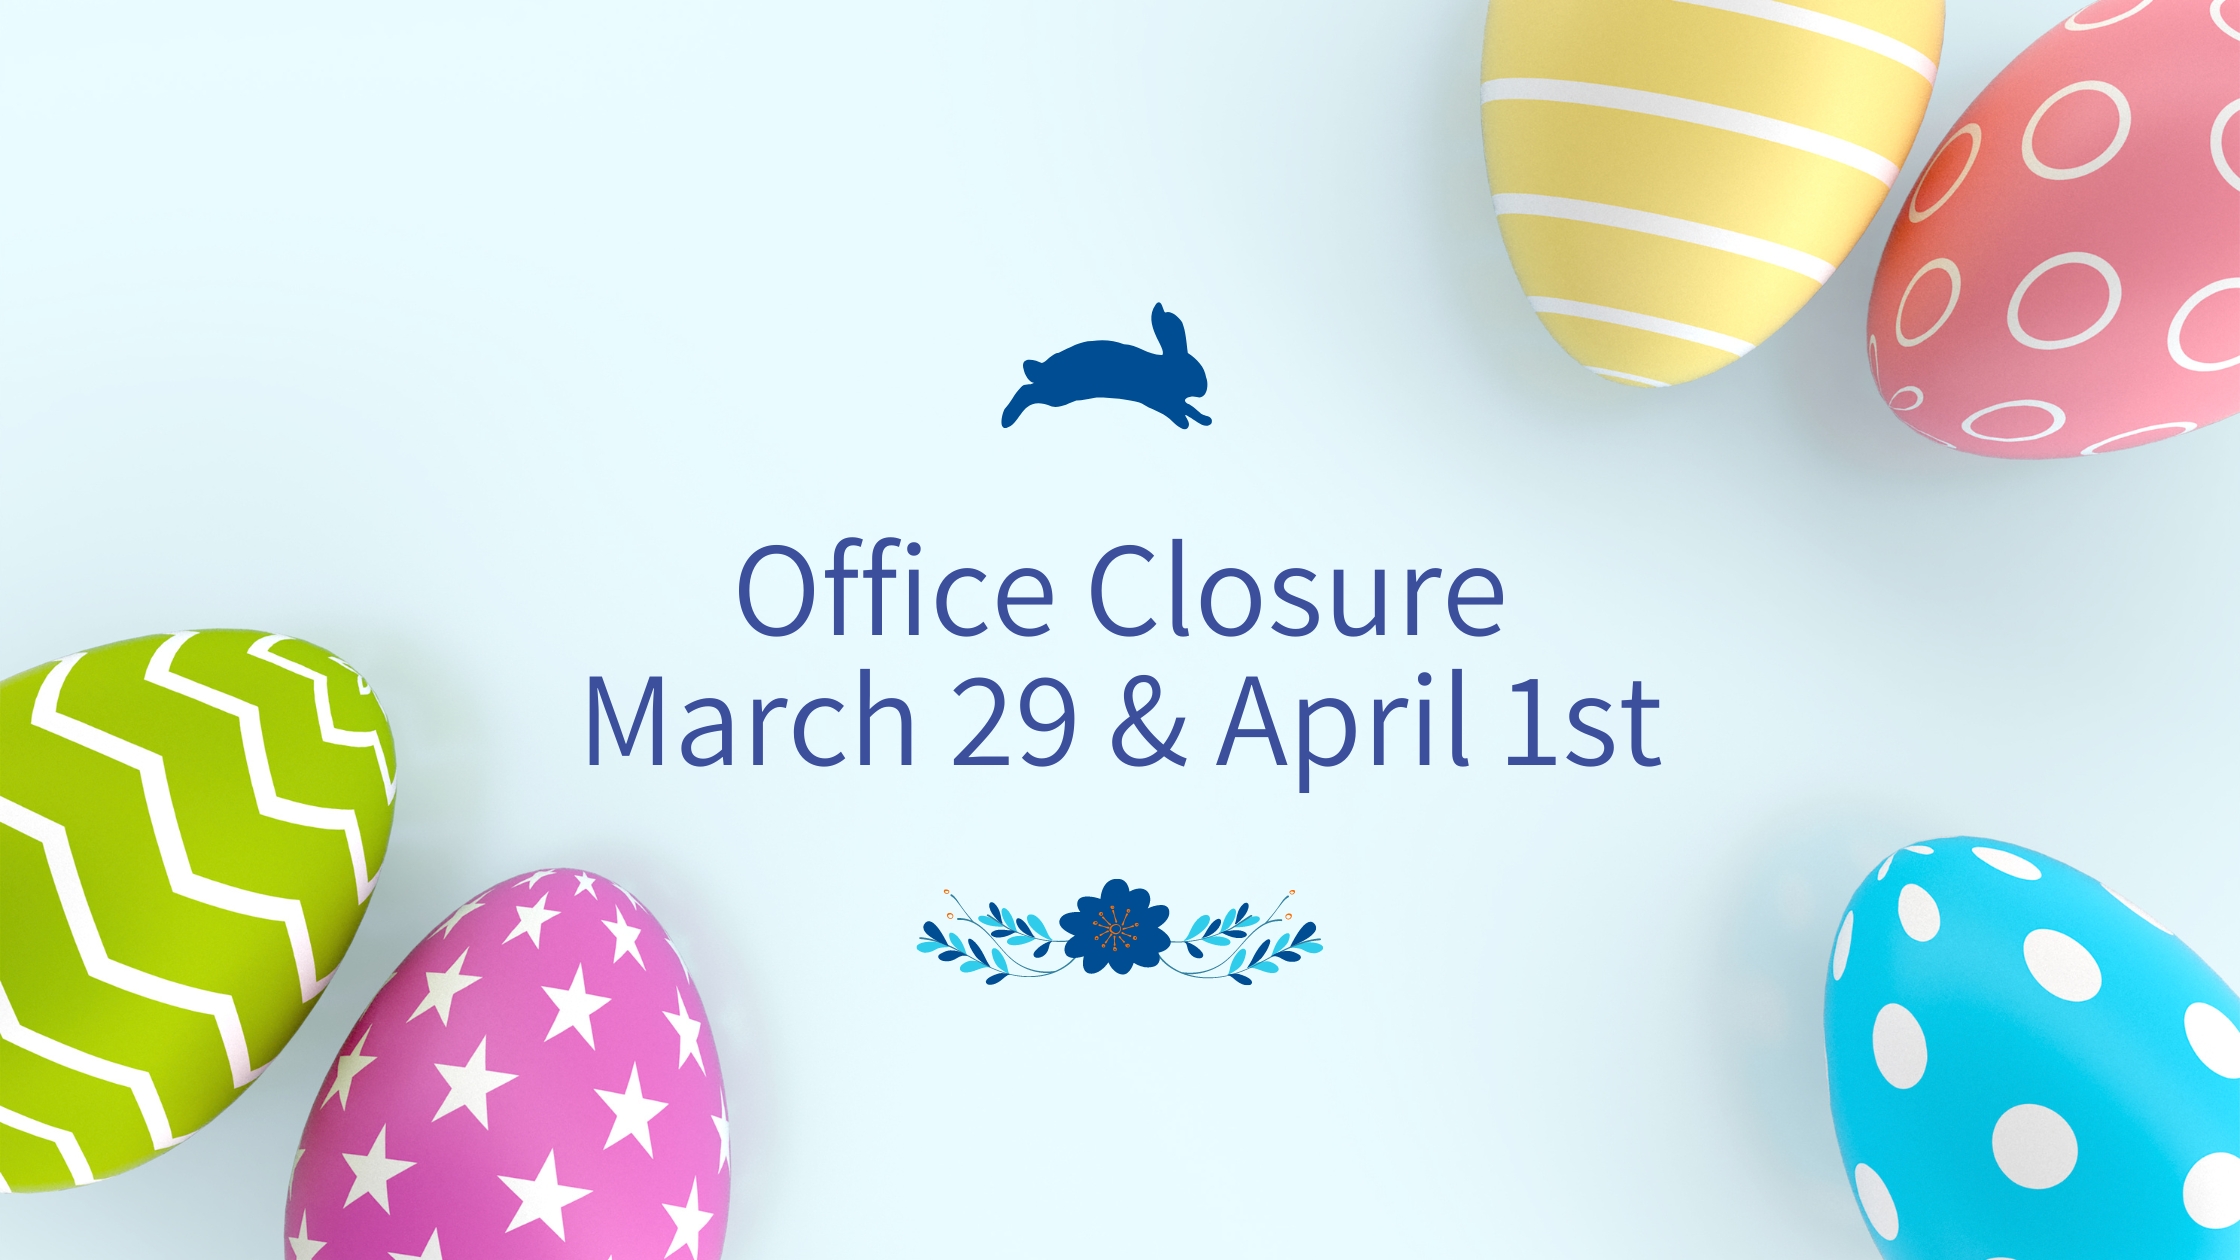 Office Closure for Easter Weekend